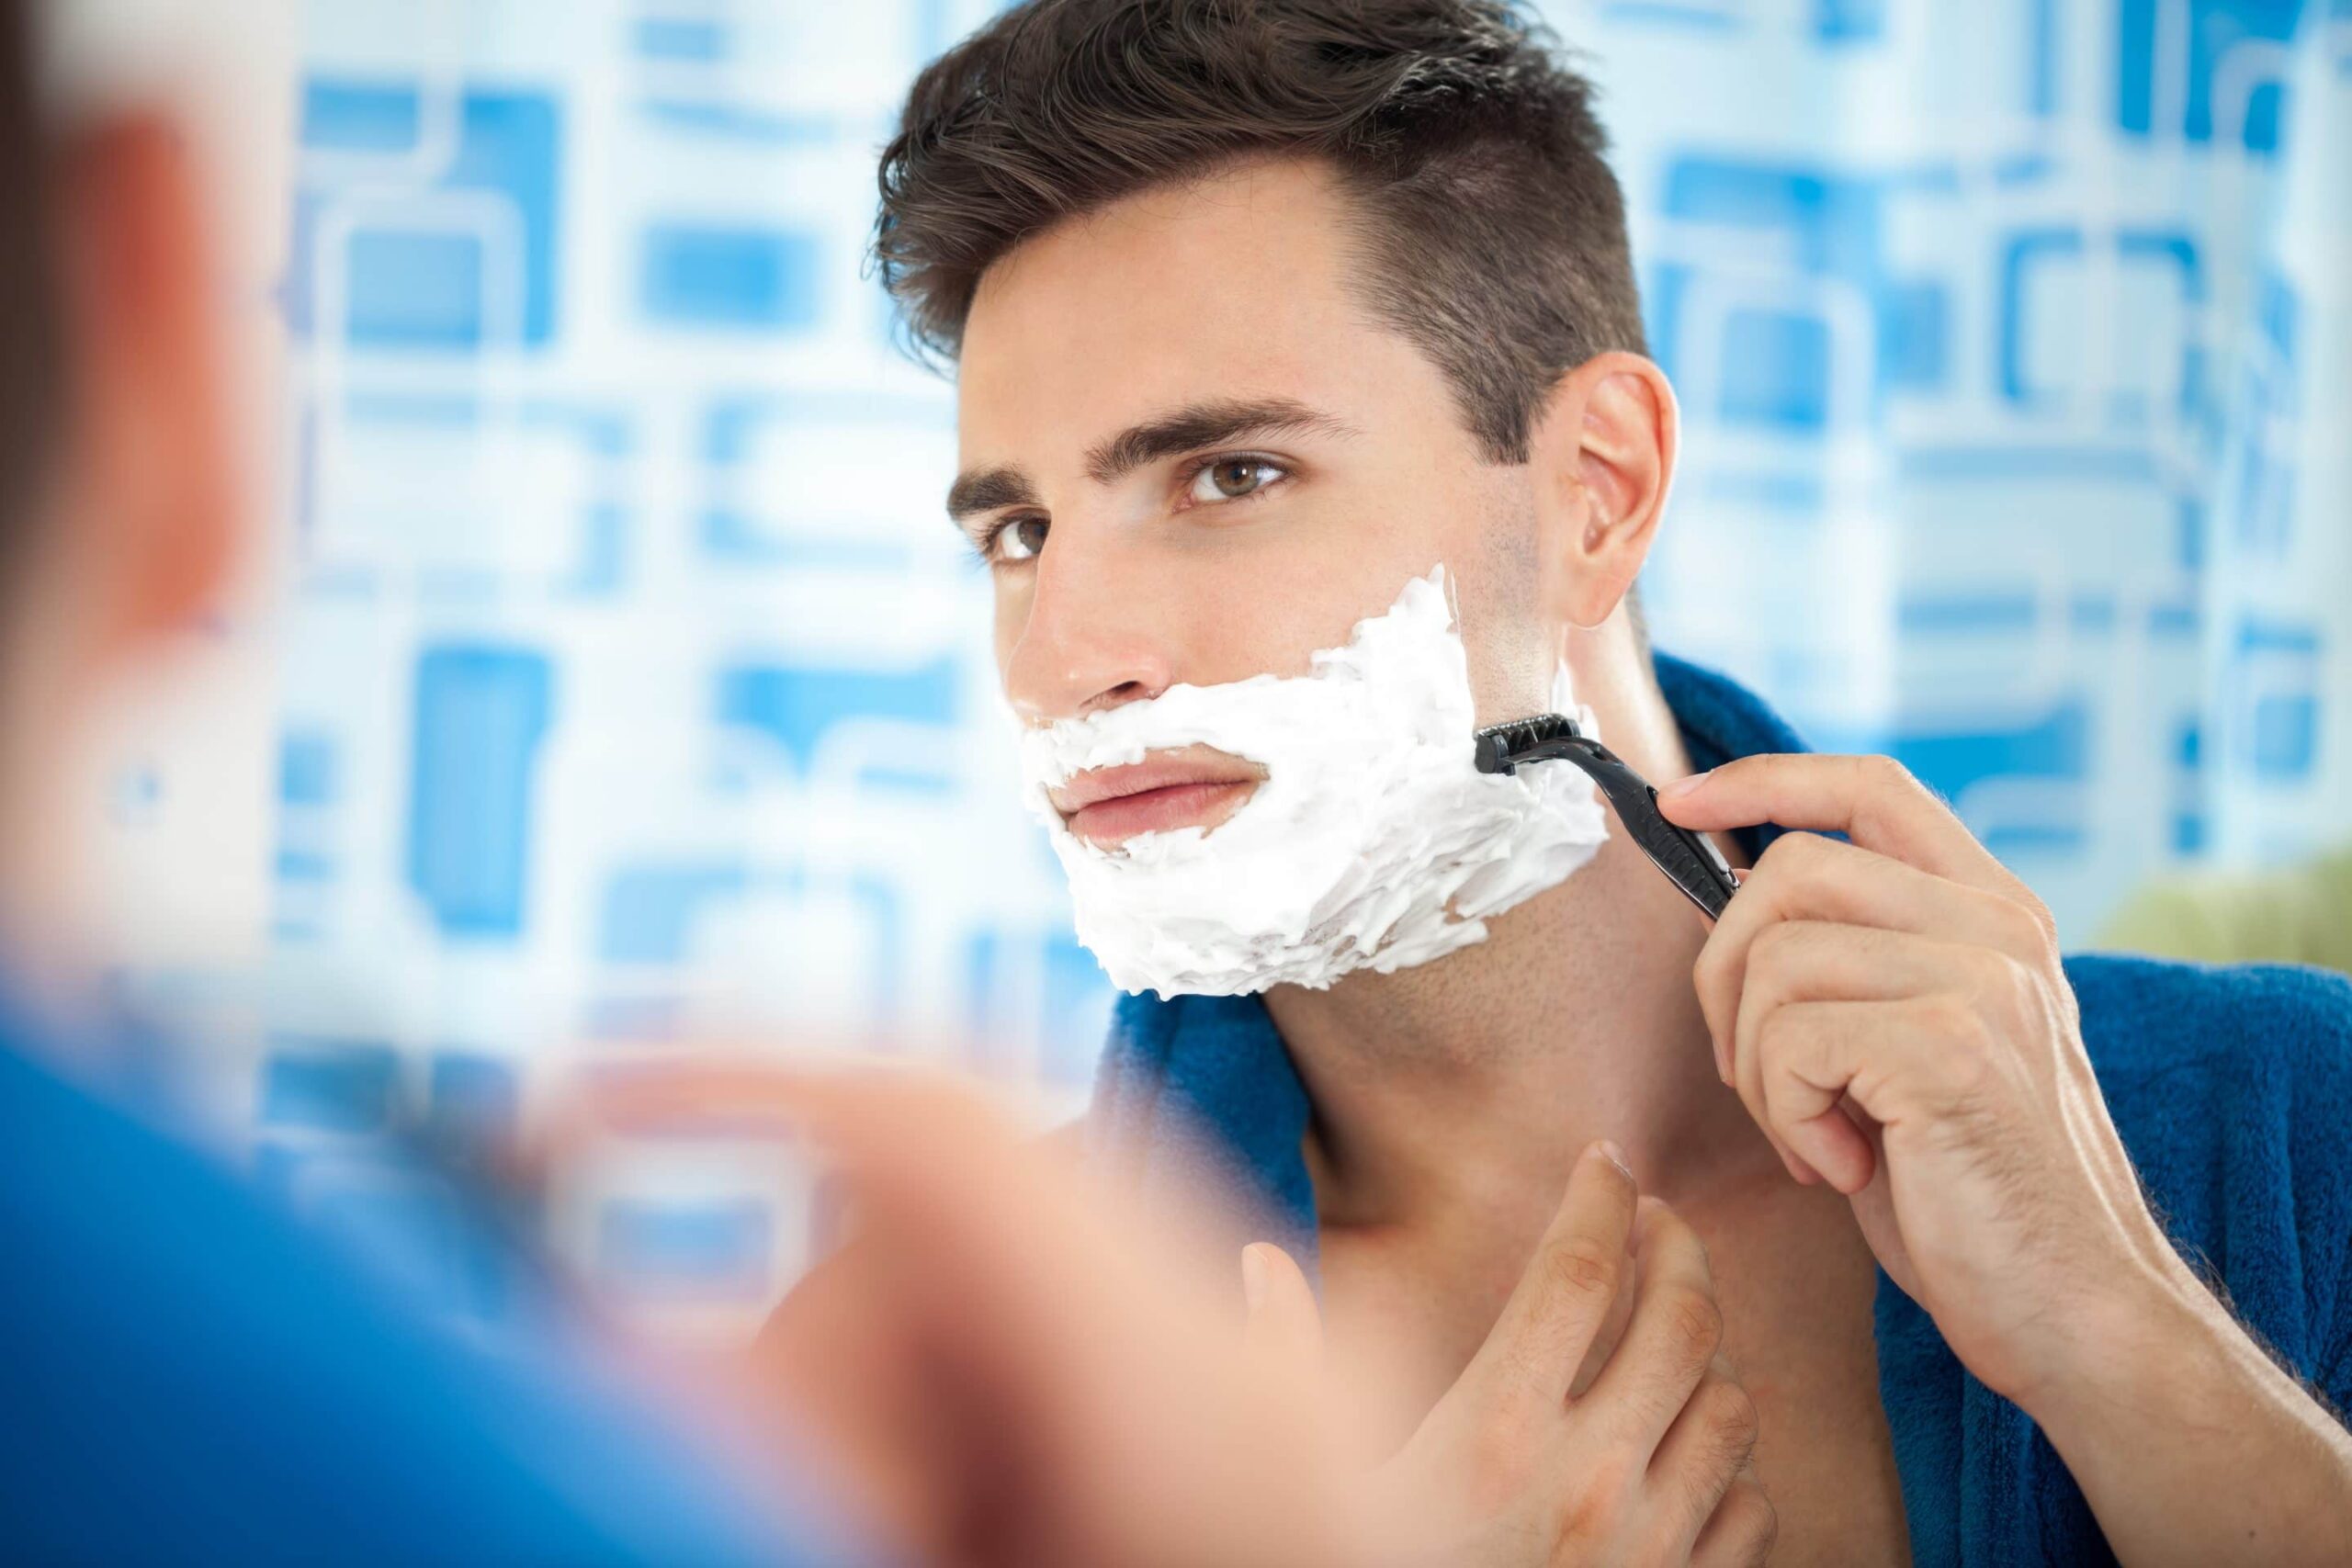 The Best Ways to Get Rid Of & Prevent Red Bumps from Shaving